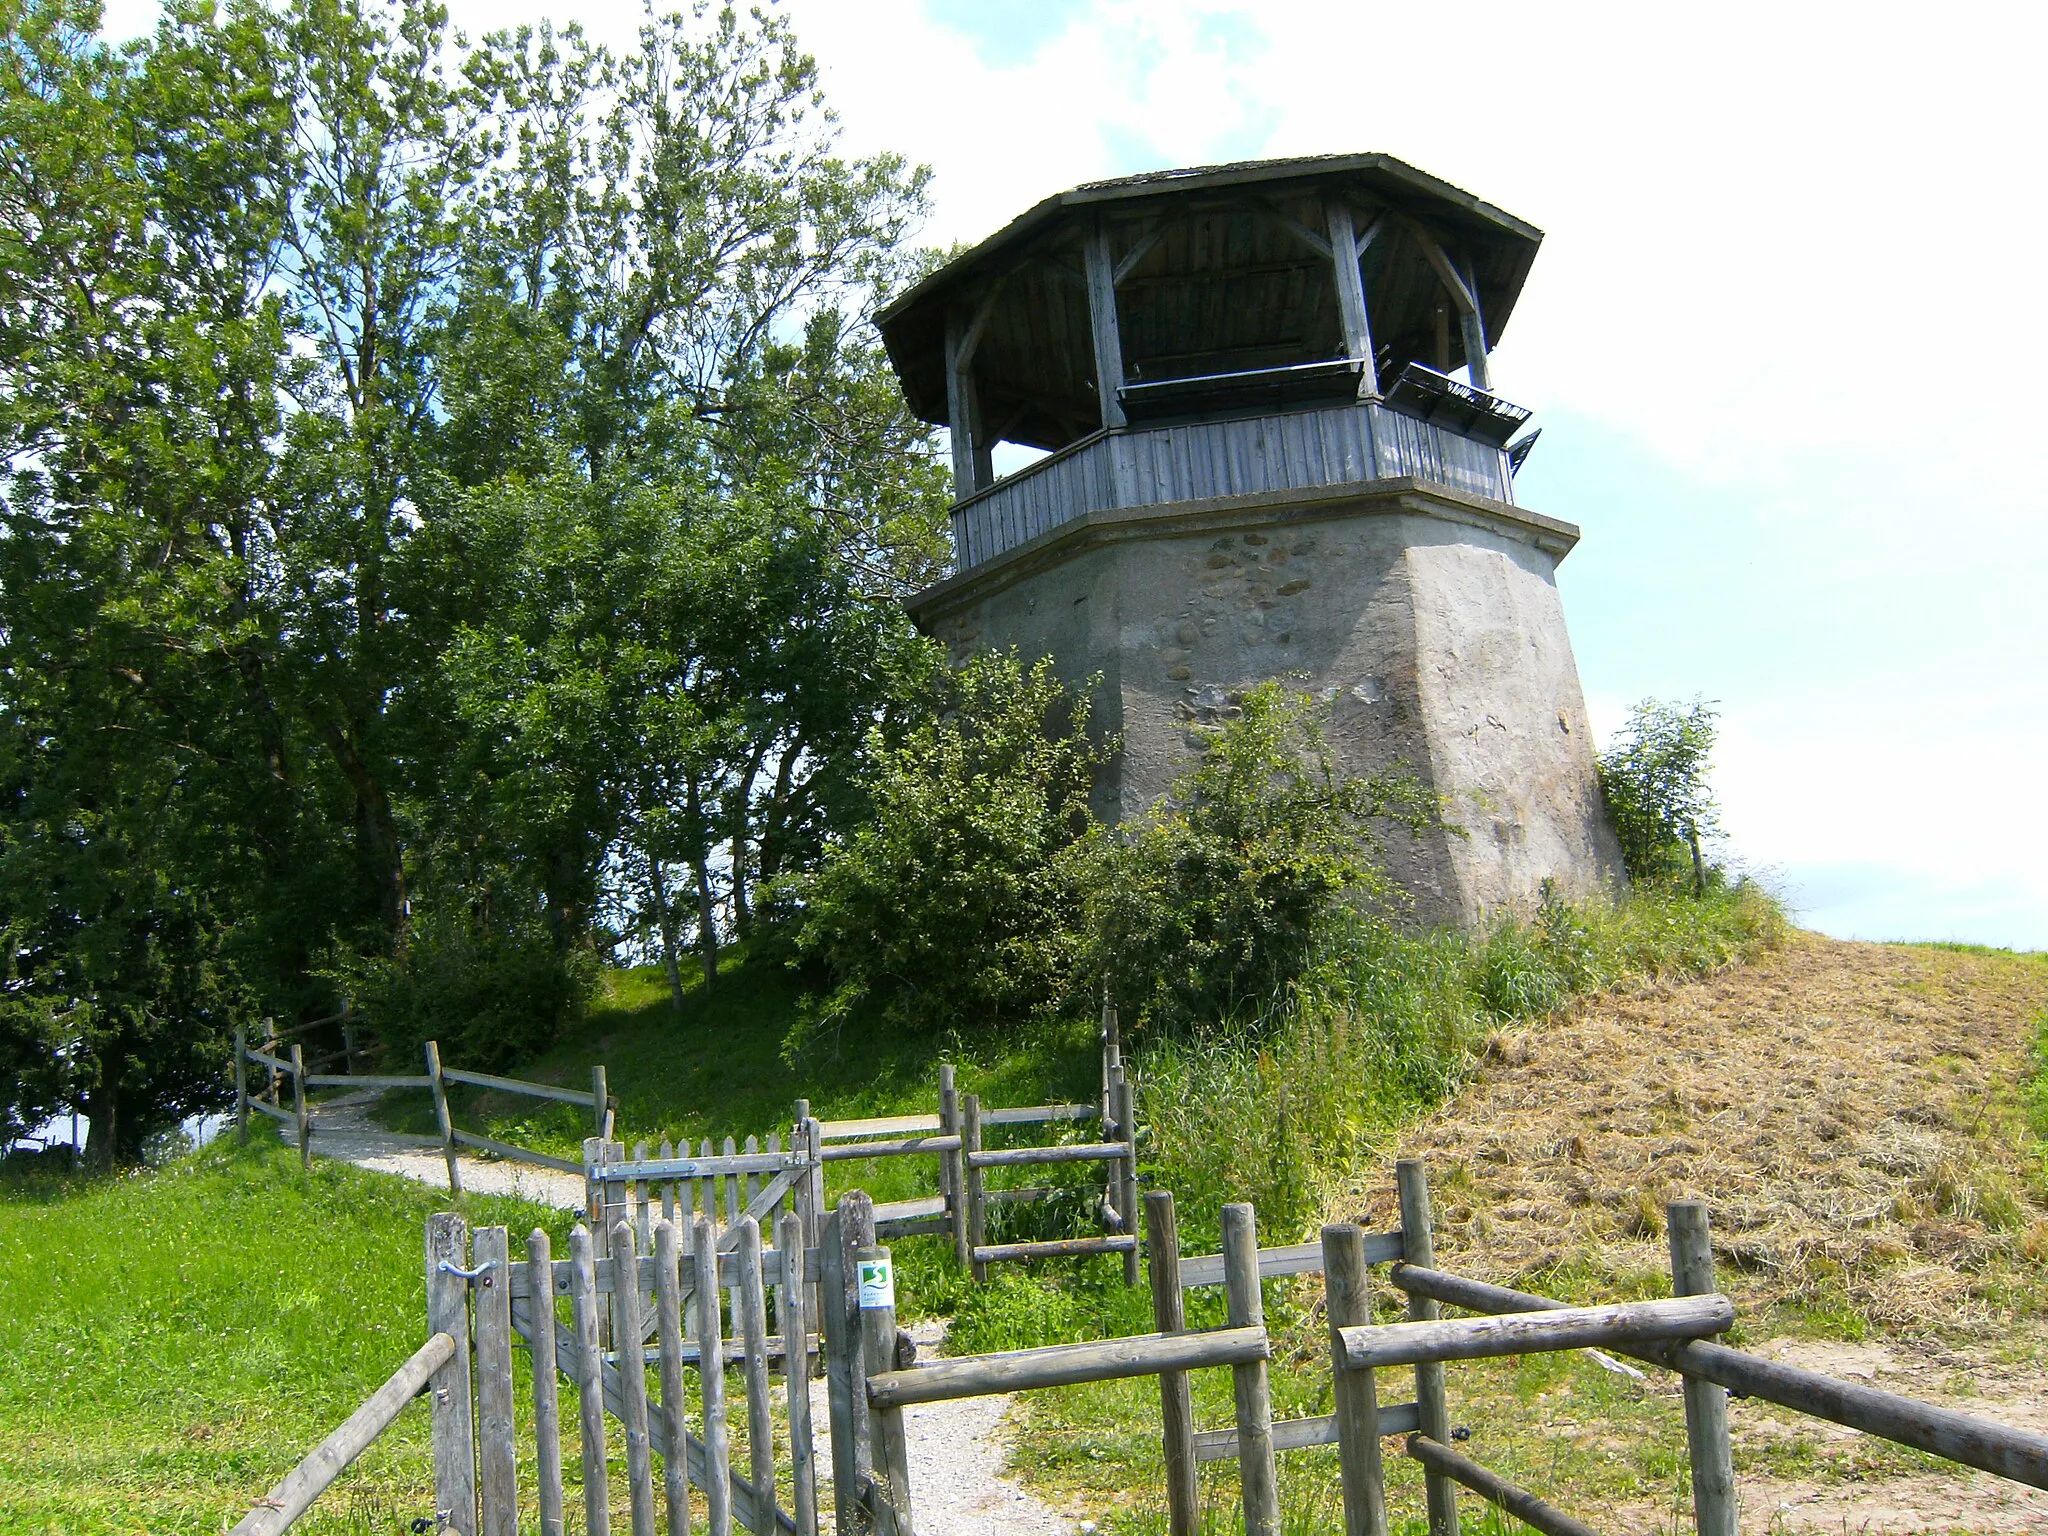 Photo showing: Viewpoint at Höchsten hill in Germany, part of the path of Swuabian-alemannic dialects.